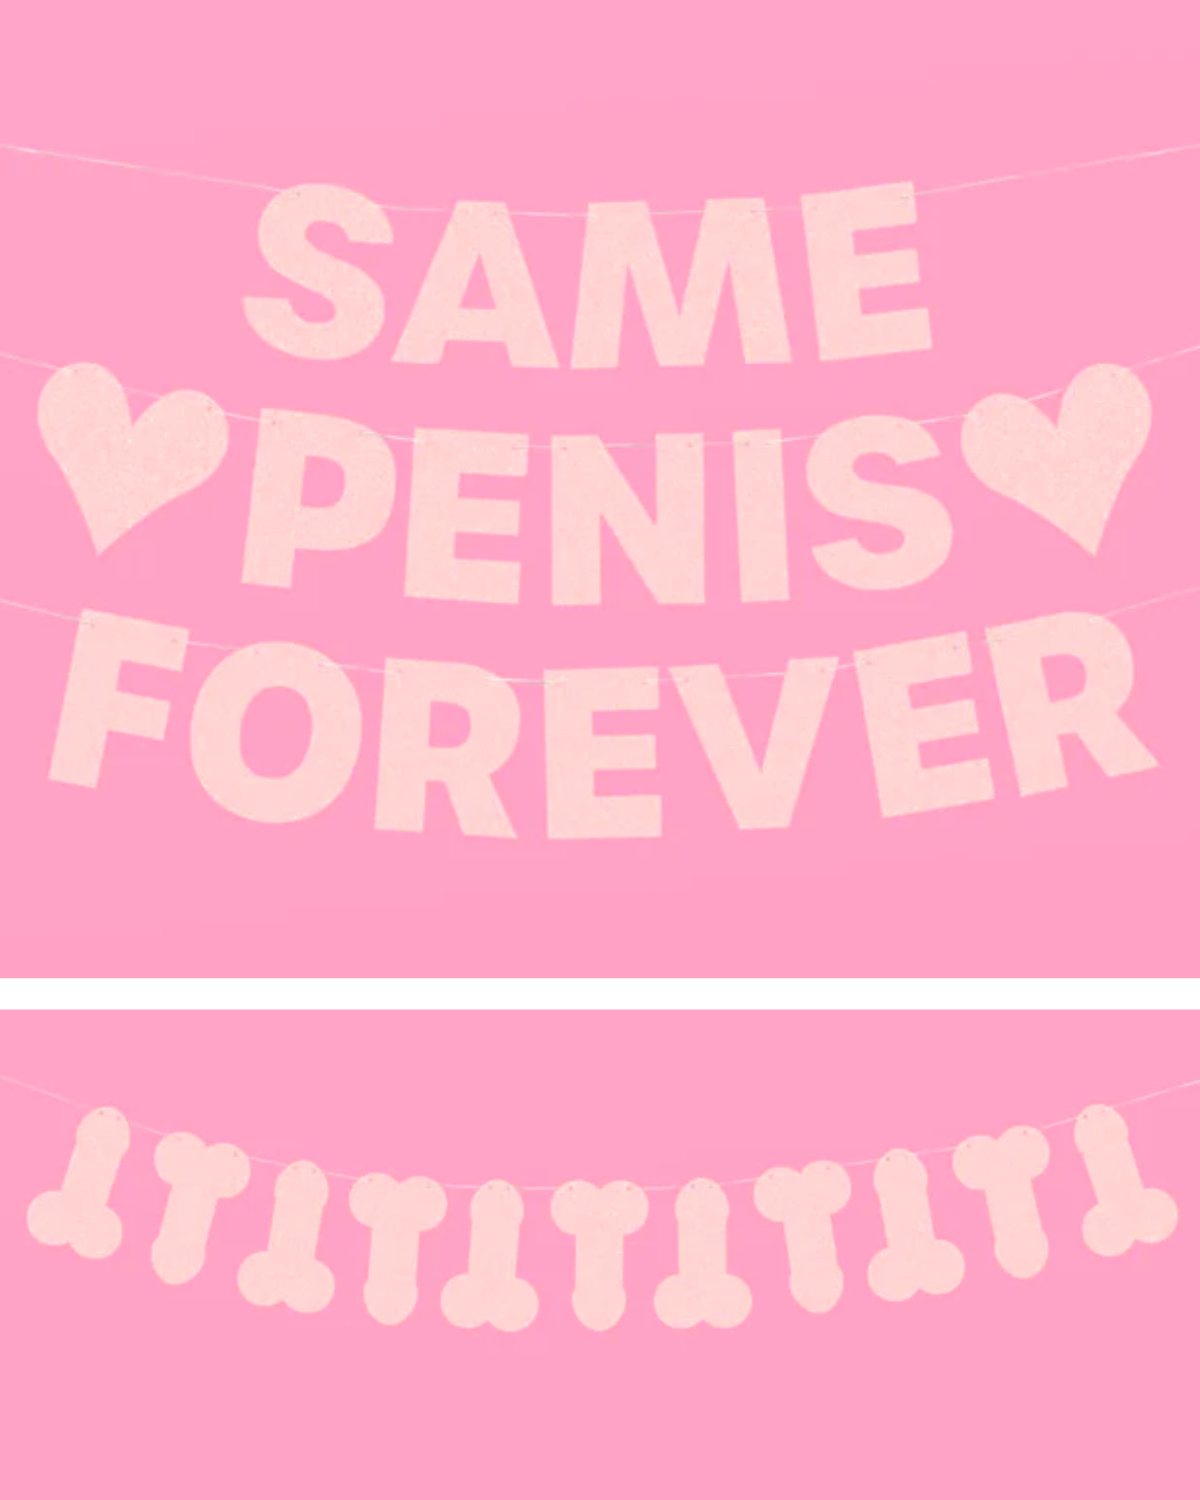 Same Penis 4ever Pack - 2 pink glitter banners